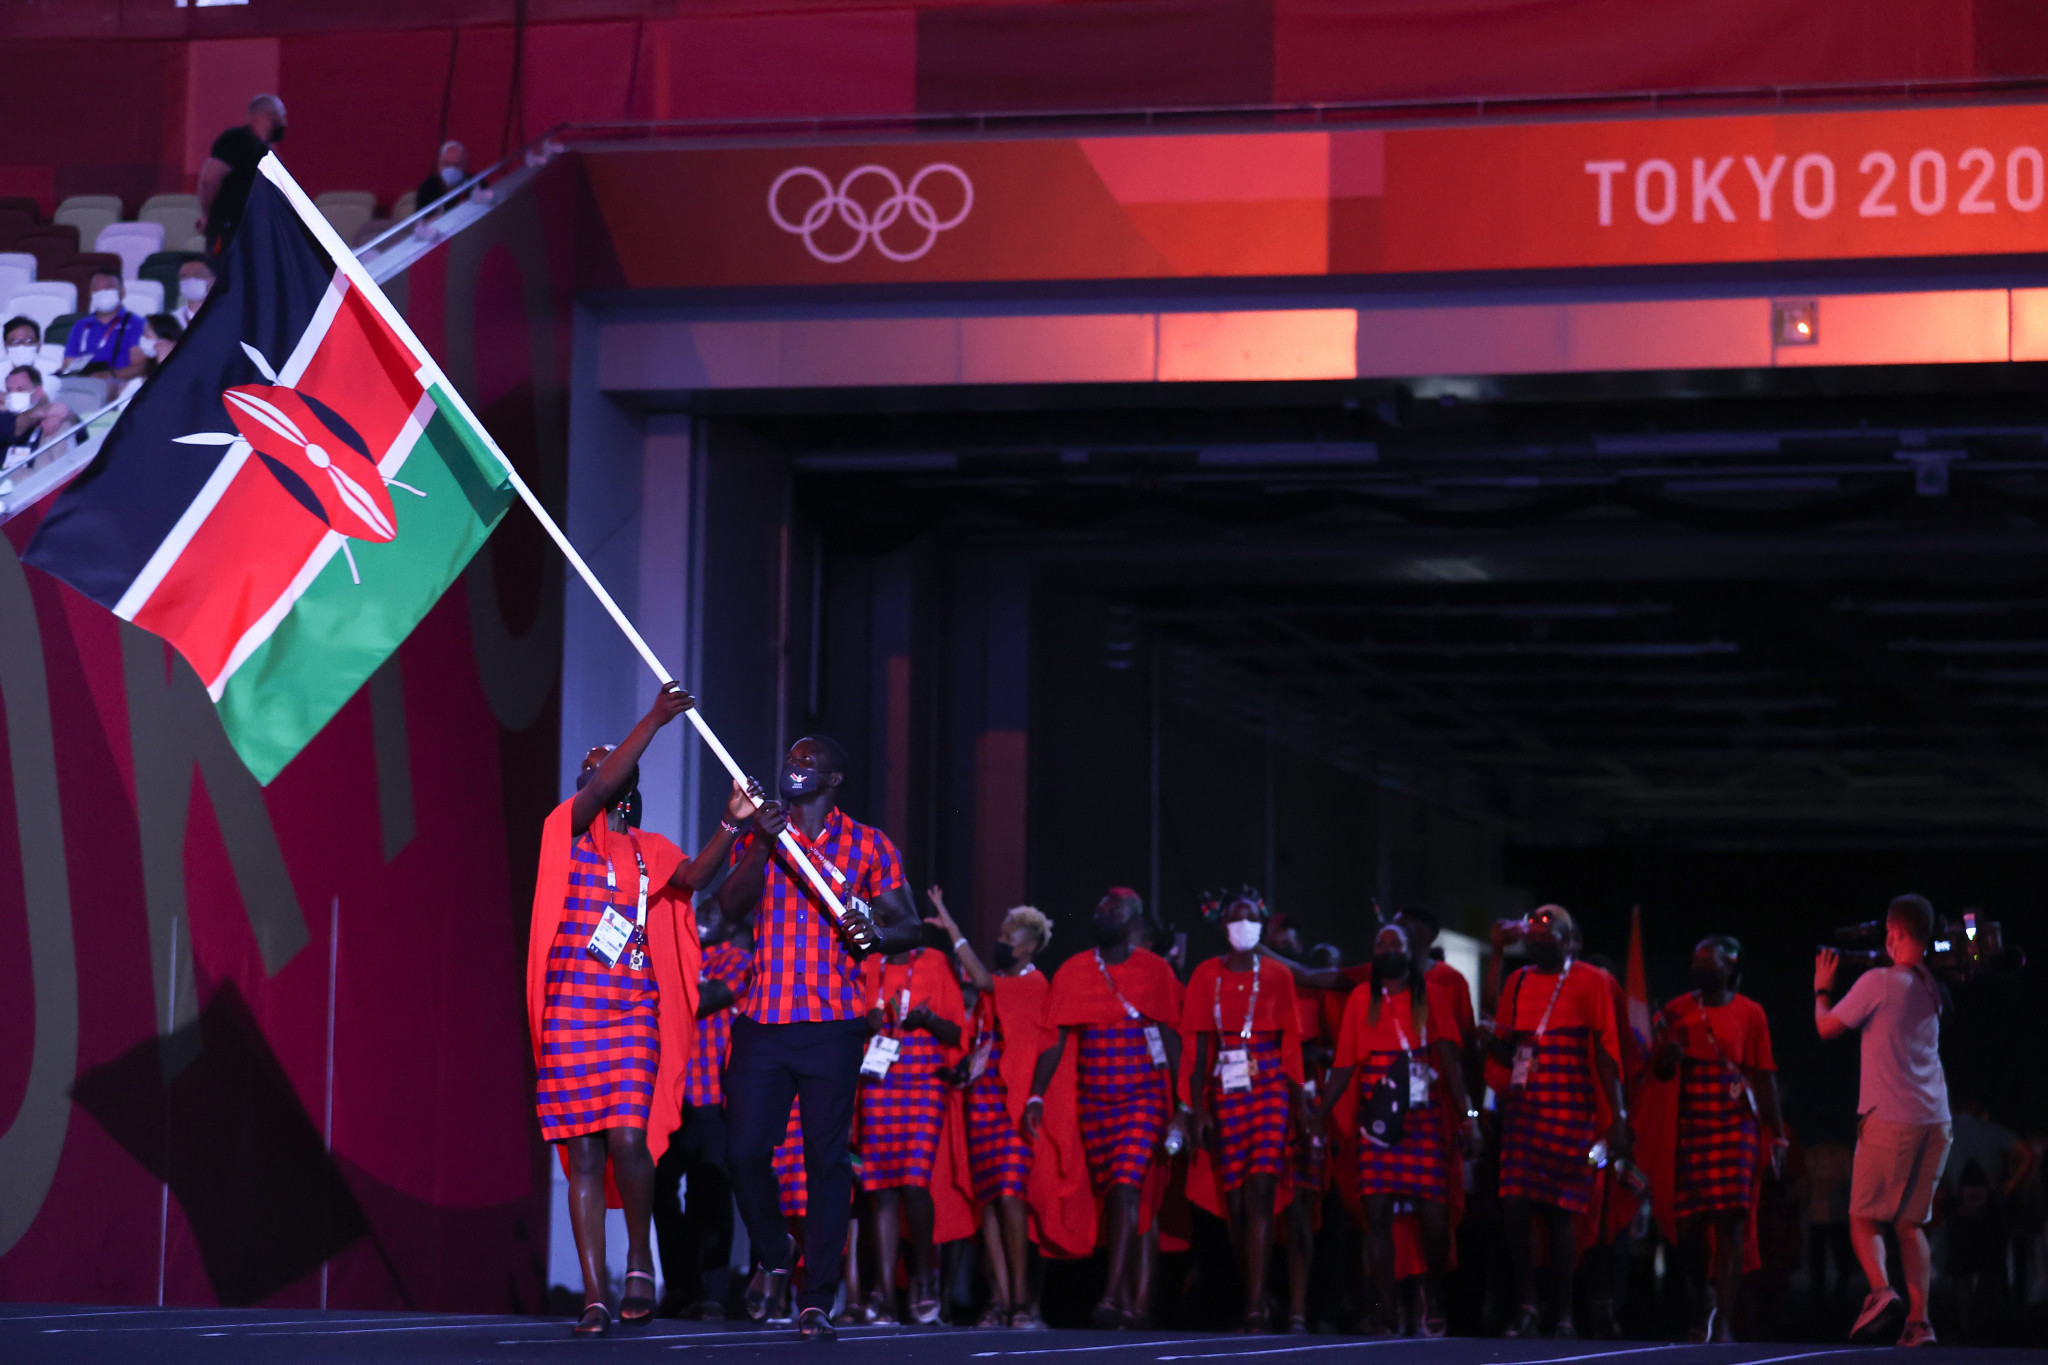 Athletics Kenya's fear of lengthy ban allayed as Coe hails Government's new anti-doping investment